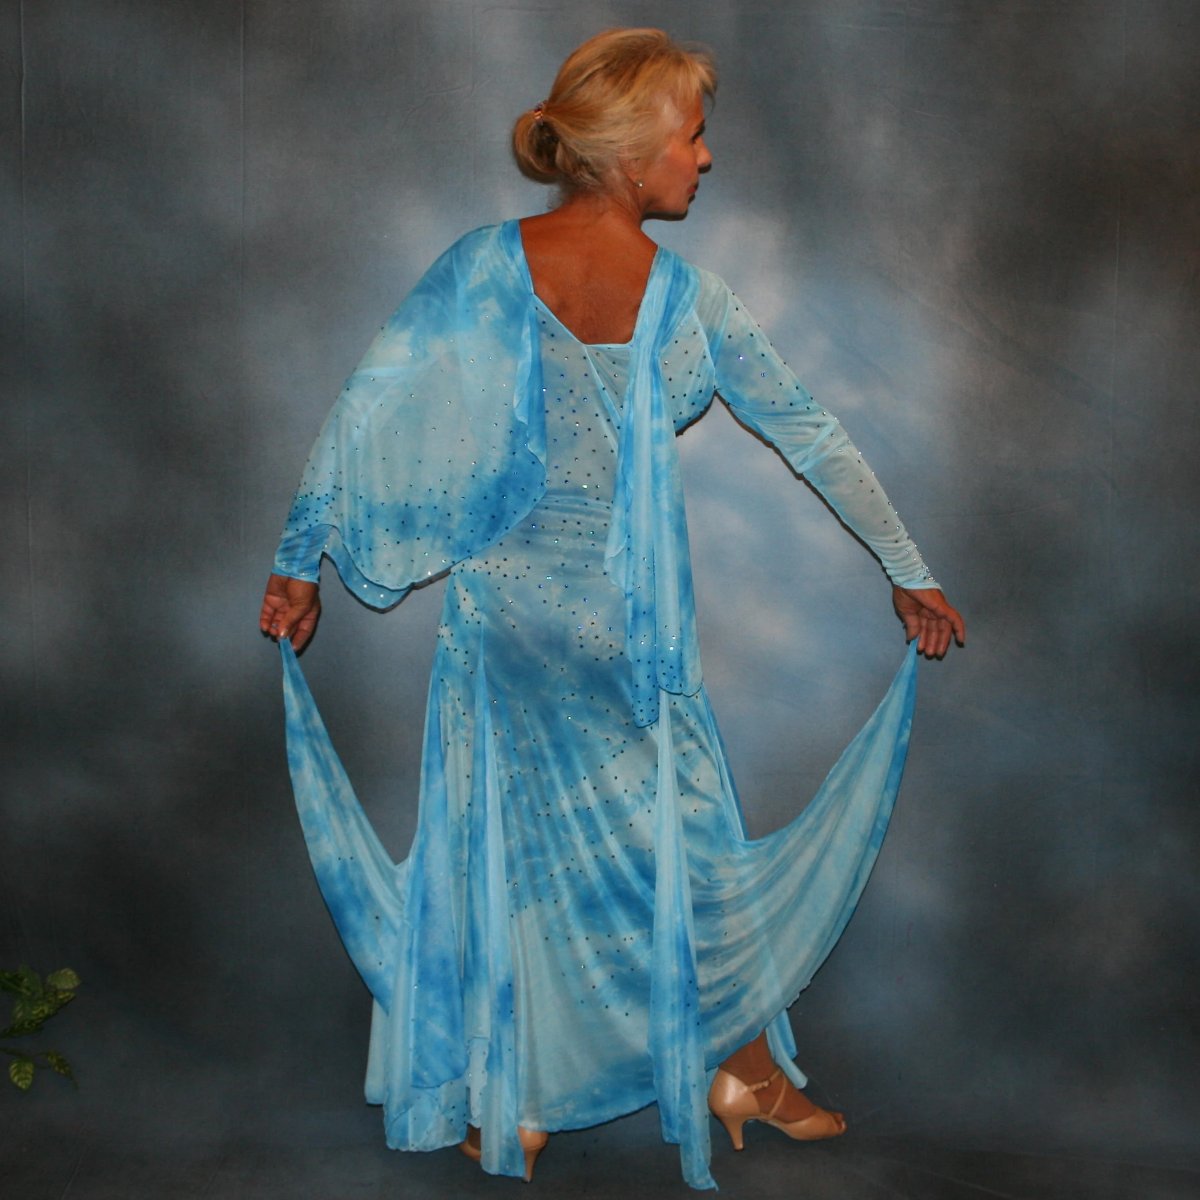 Crystal's Creations back view of Elegant blue ballroom dress created in shades of blue printed semi sheer stretch with floats, fabulous for a solo ballroom dance or a theatrical ballroom number…embellished with Swarovski rhinestone work in shades of capri blue & aquamarine